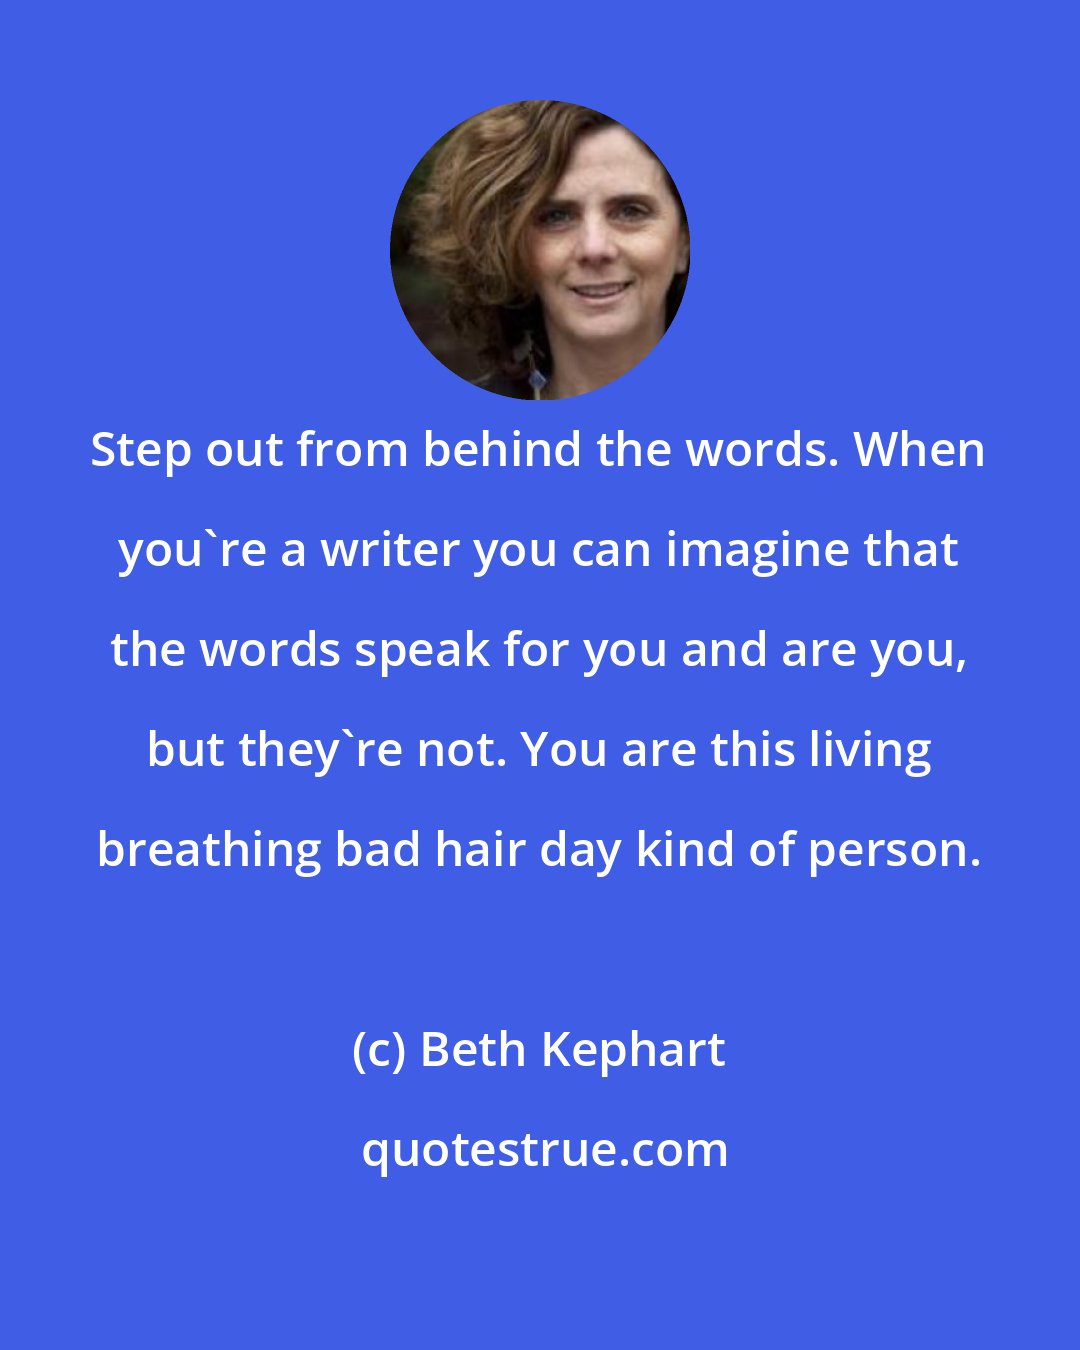 Beth Kephart: Step out from behind the words. When you're a writer you can imagine that the words speak for you and are you, but they're not. You are this living breathing bad hair day kind of person.